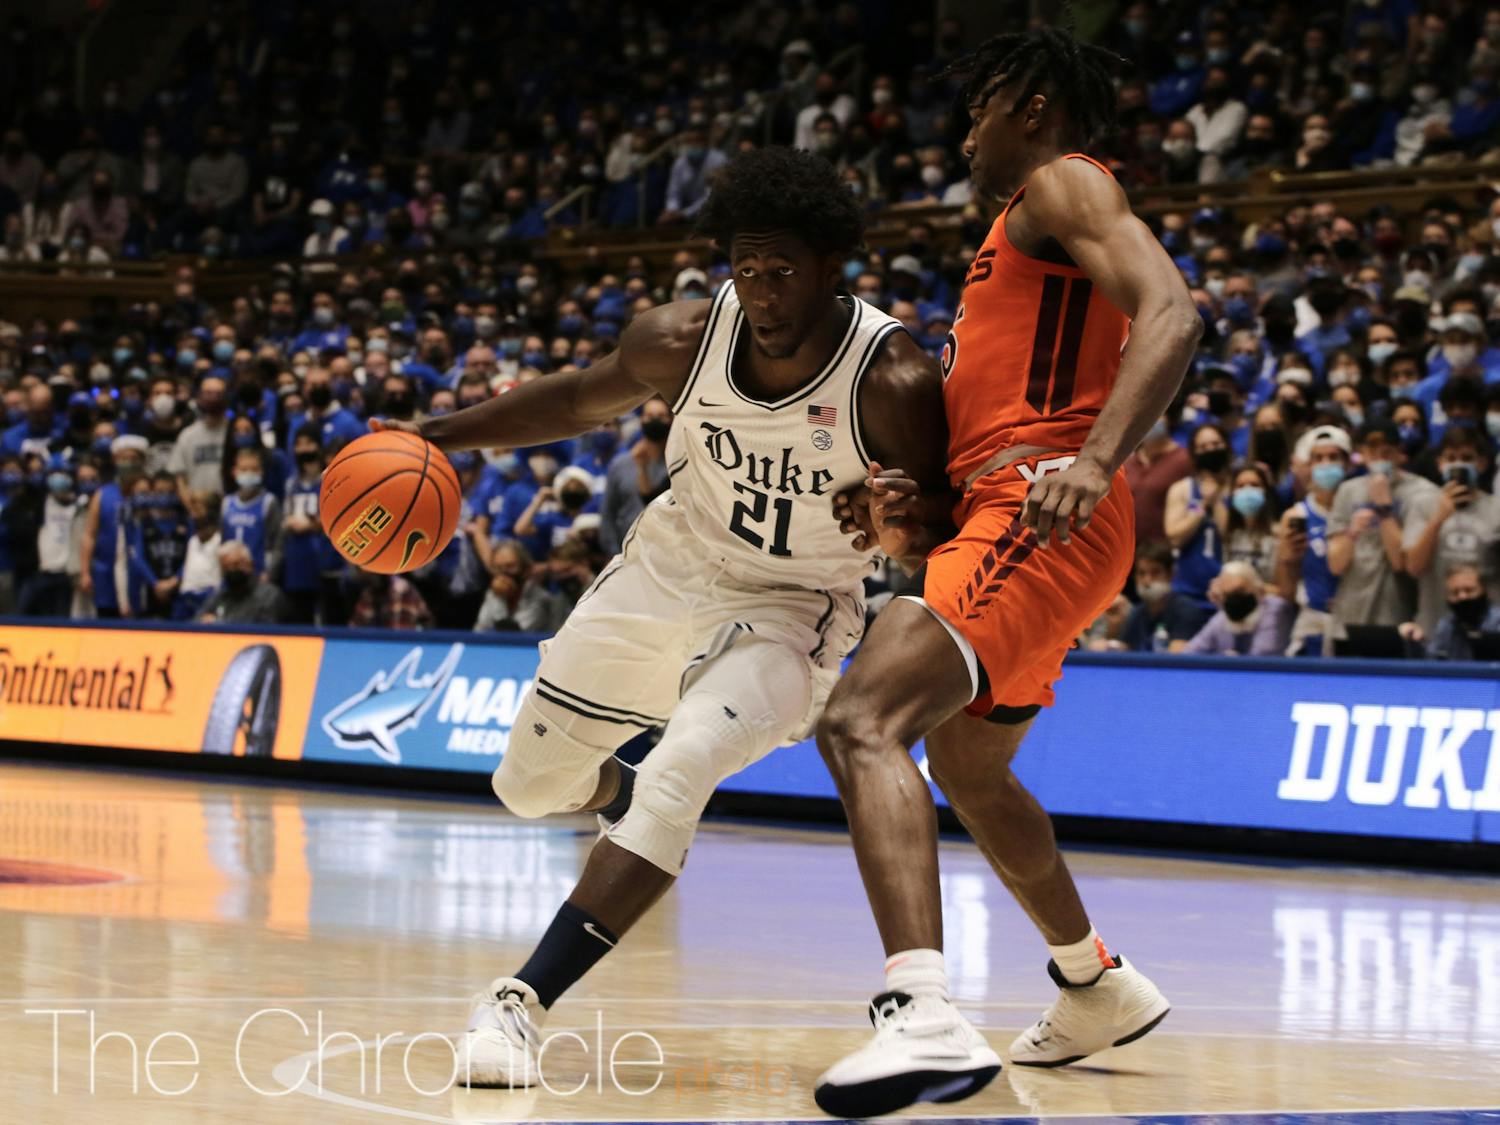 Freshman forward AJ Griffin scored double-digit points off the bench and was a key part of Duke's second-half comeback. 